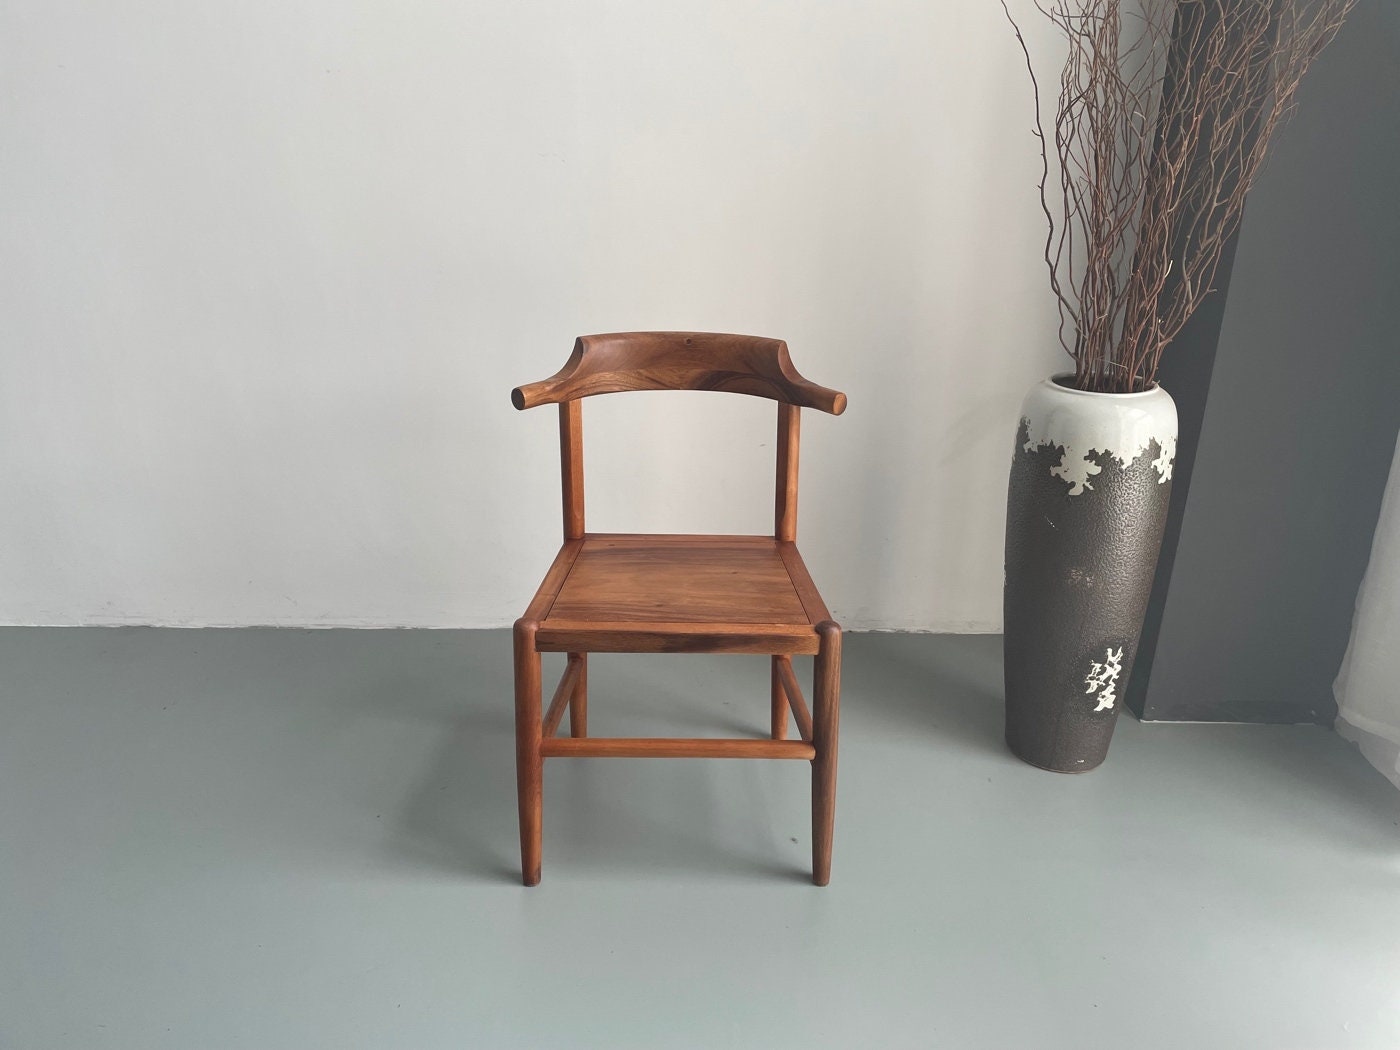 Walnut Dining chair, Dining chair, Family Style chair, Family Dining chair,not black Walnut chair, leather chair